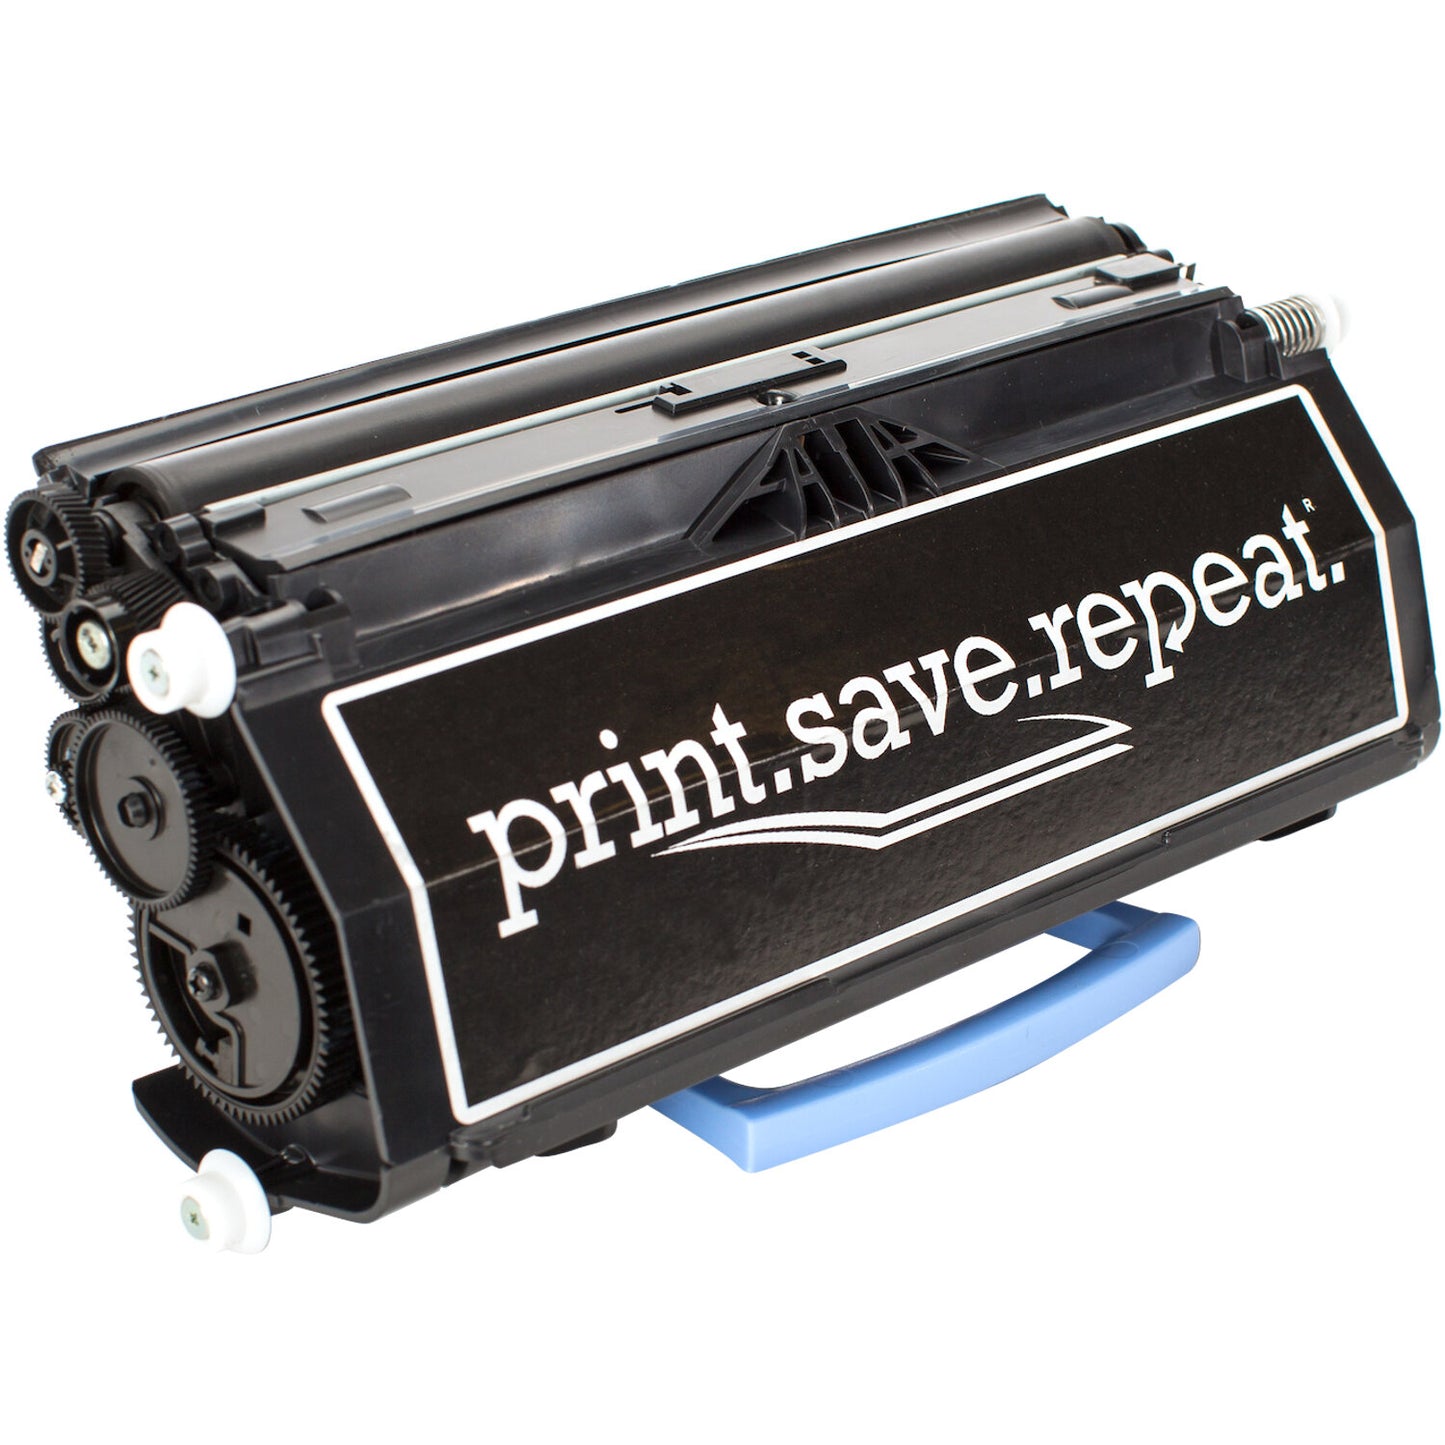 Print.Save.Repeat. Dell PK941 High Yield Remanufactured Toner Cartridge for 2330, 2350 [6,000 Pages]